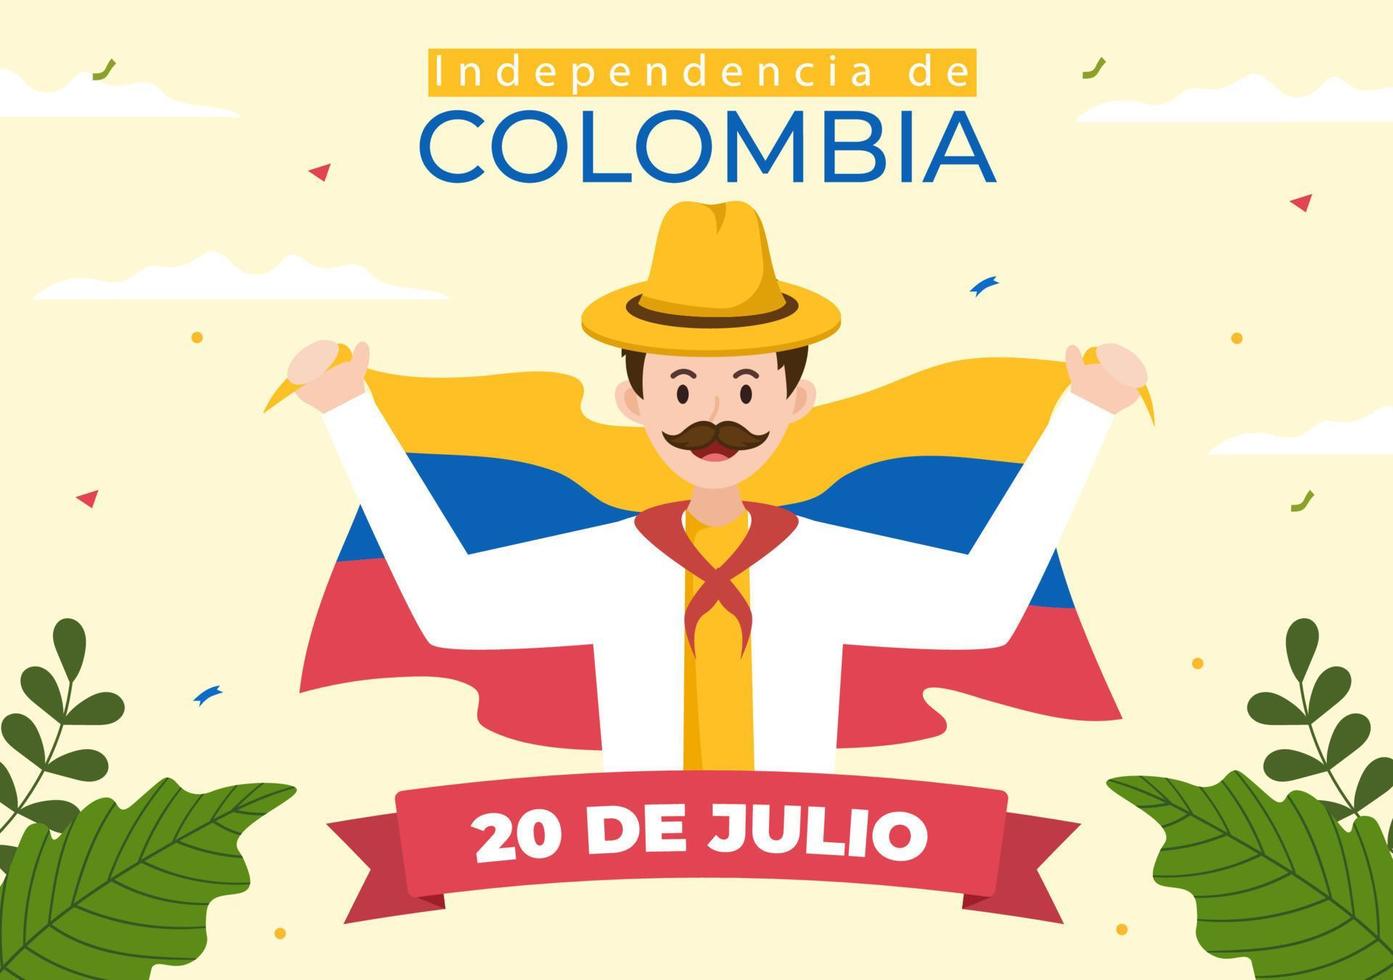 20 De Julio independencia De Colombia Cartoon Illustration with Flags, Balloons and People Characters for Poster Design vector